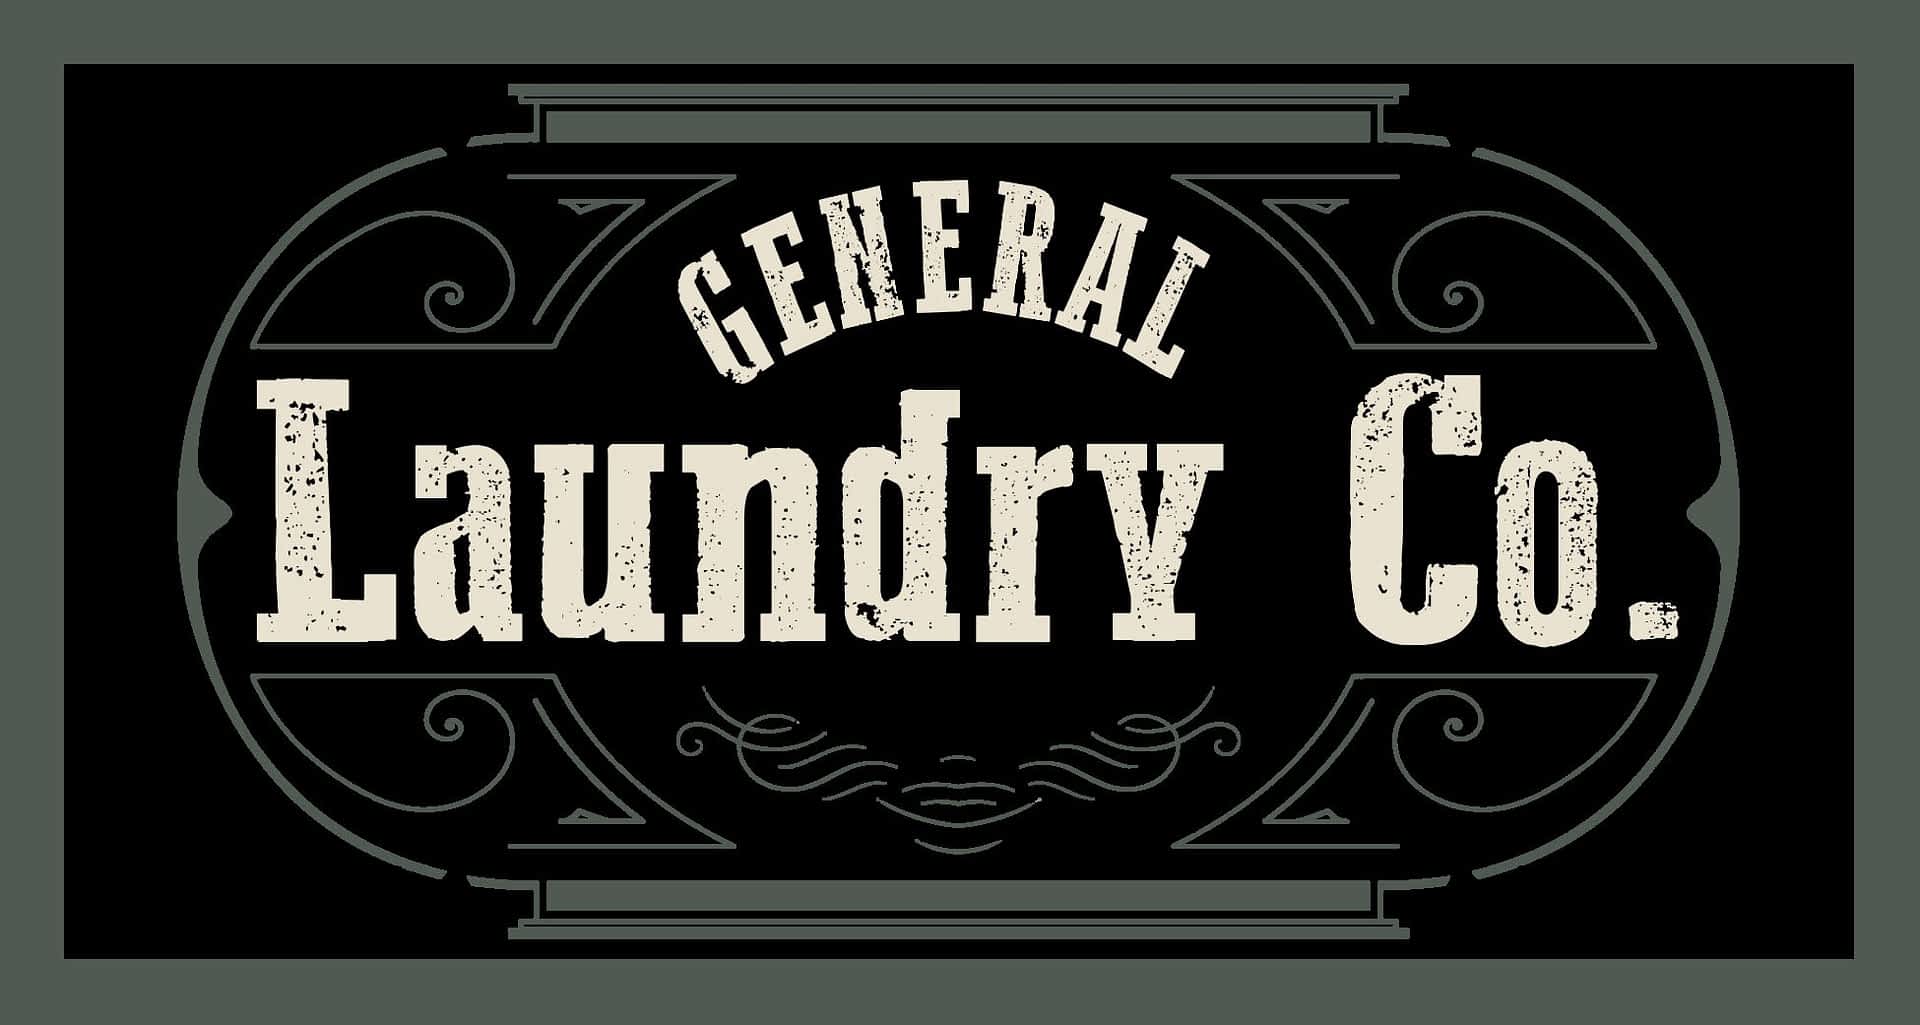 General Laundry Co.